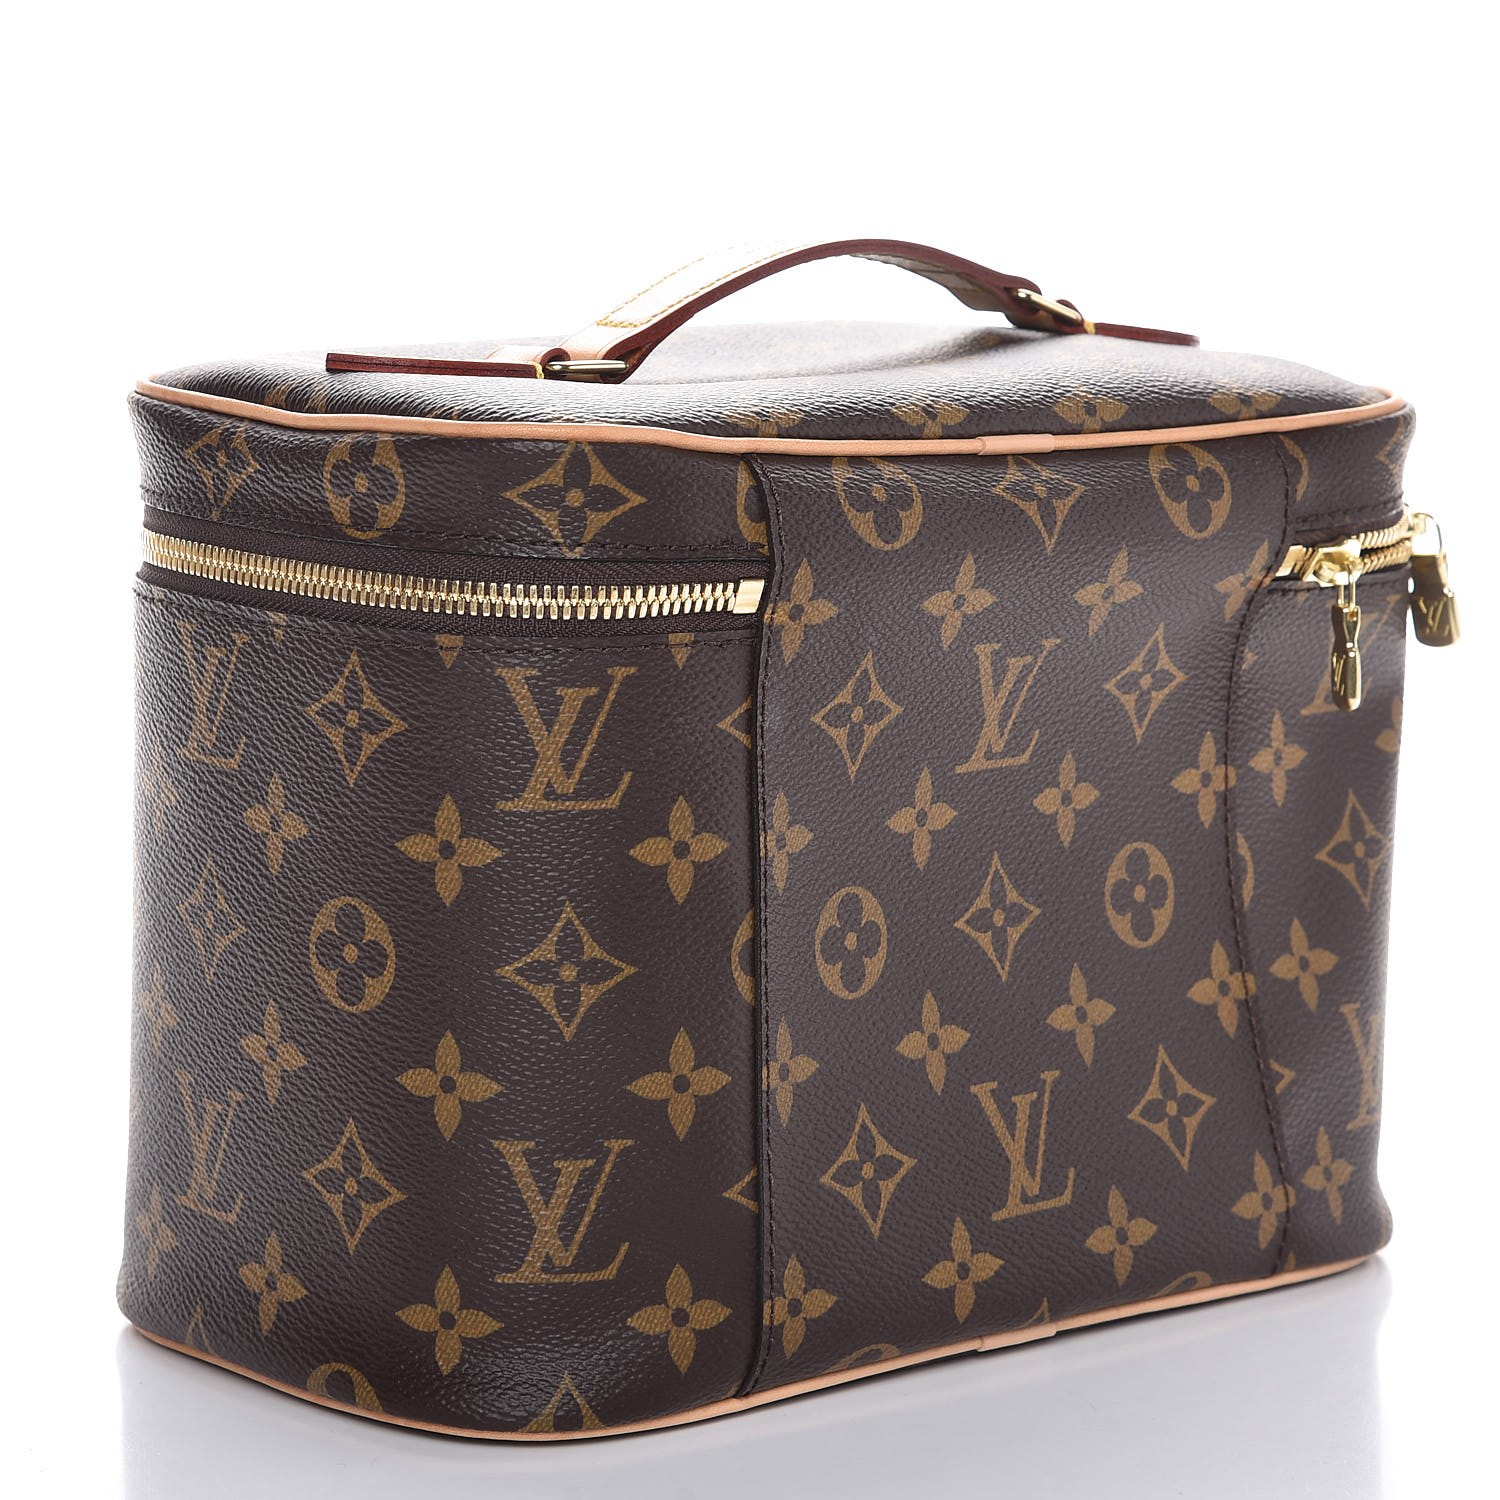 Bag and Purse Organizer with Singular Style for Louis Vuitton Nice